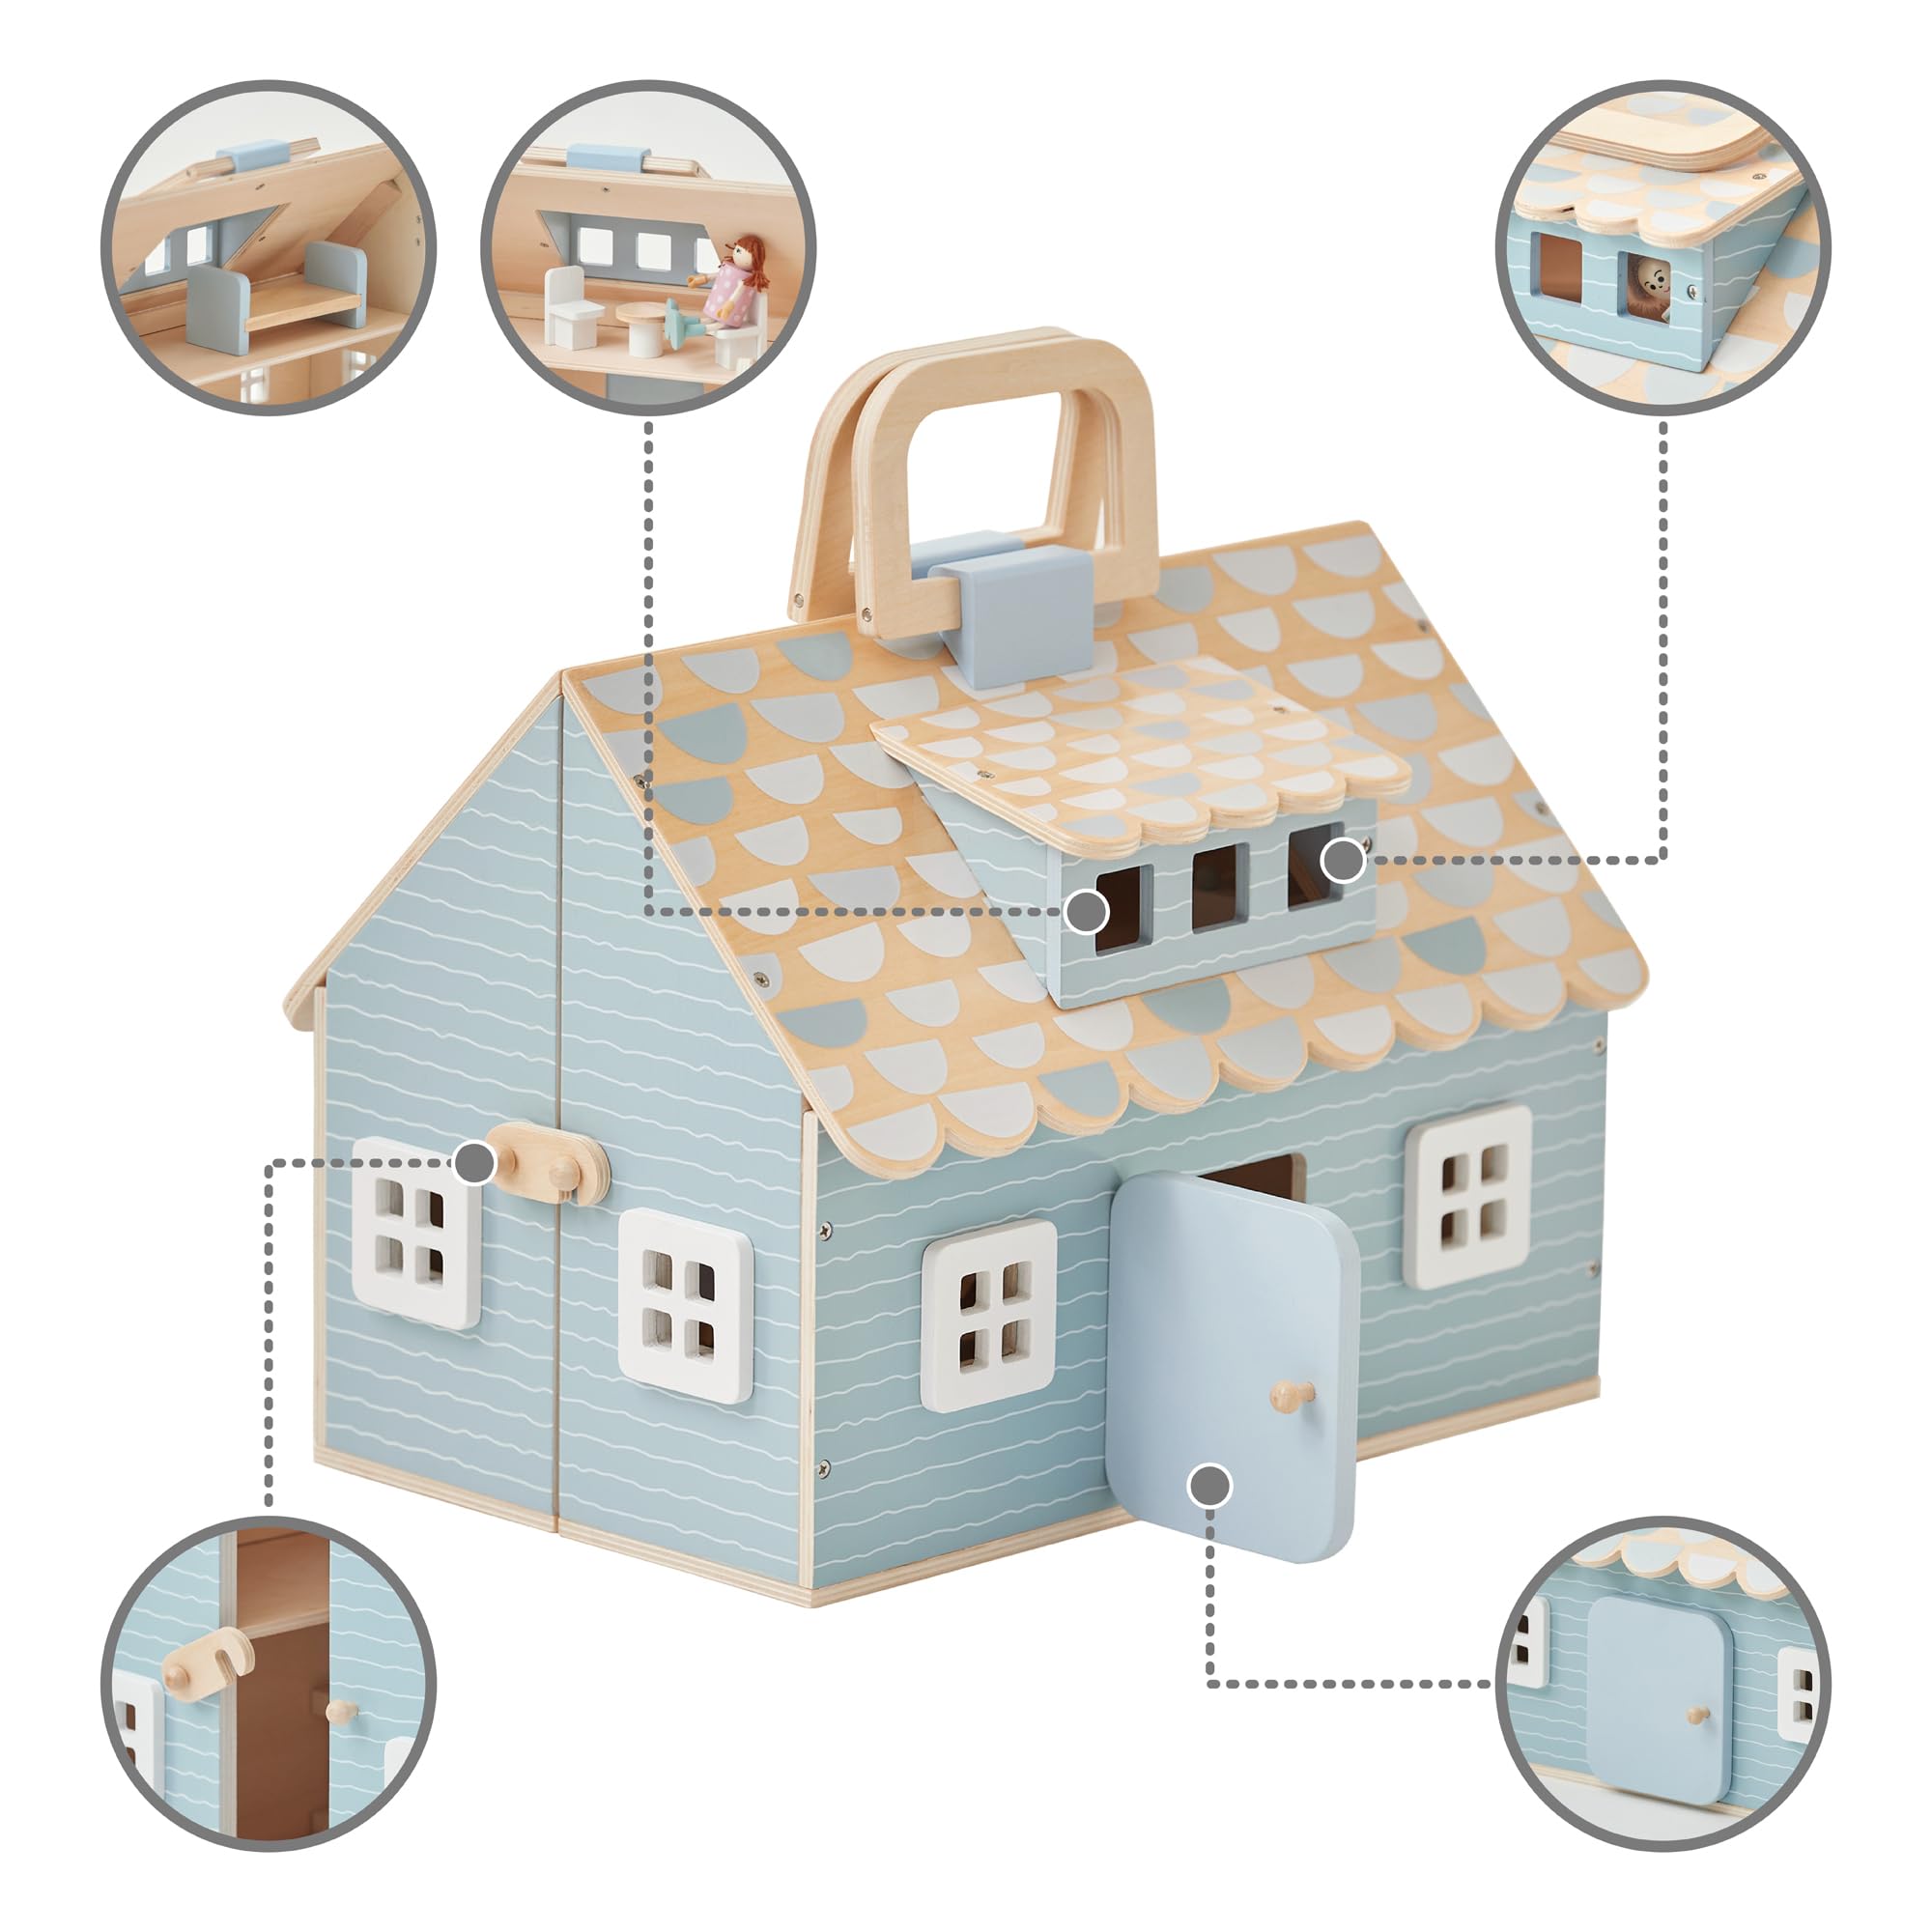 Olivia's Little World - Fold and Go Wooden Dollhouse, Quaint Little Cottage Portable Dollhouse Playset, Pretend Play Toy Gift Set with 12 Accessories, Powder Blue/Wood, Girls Gift, Ages 3+